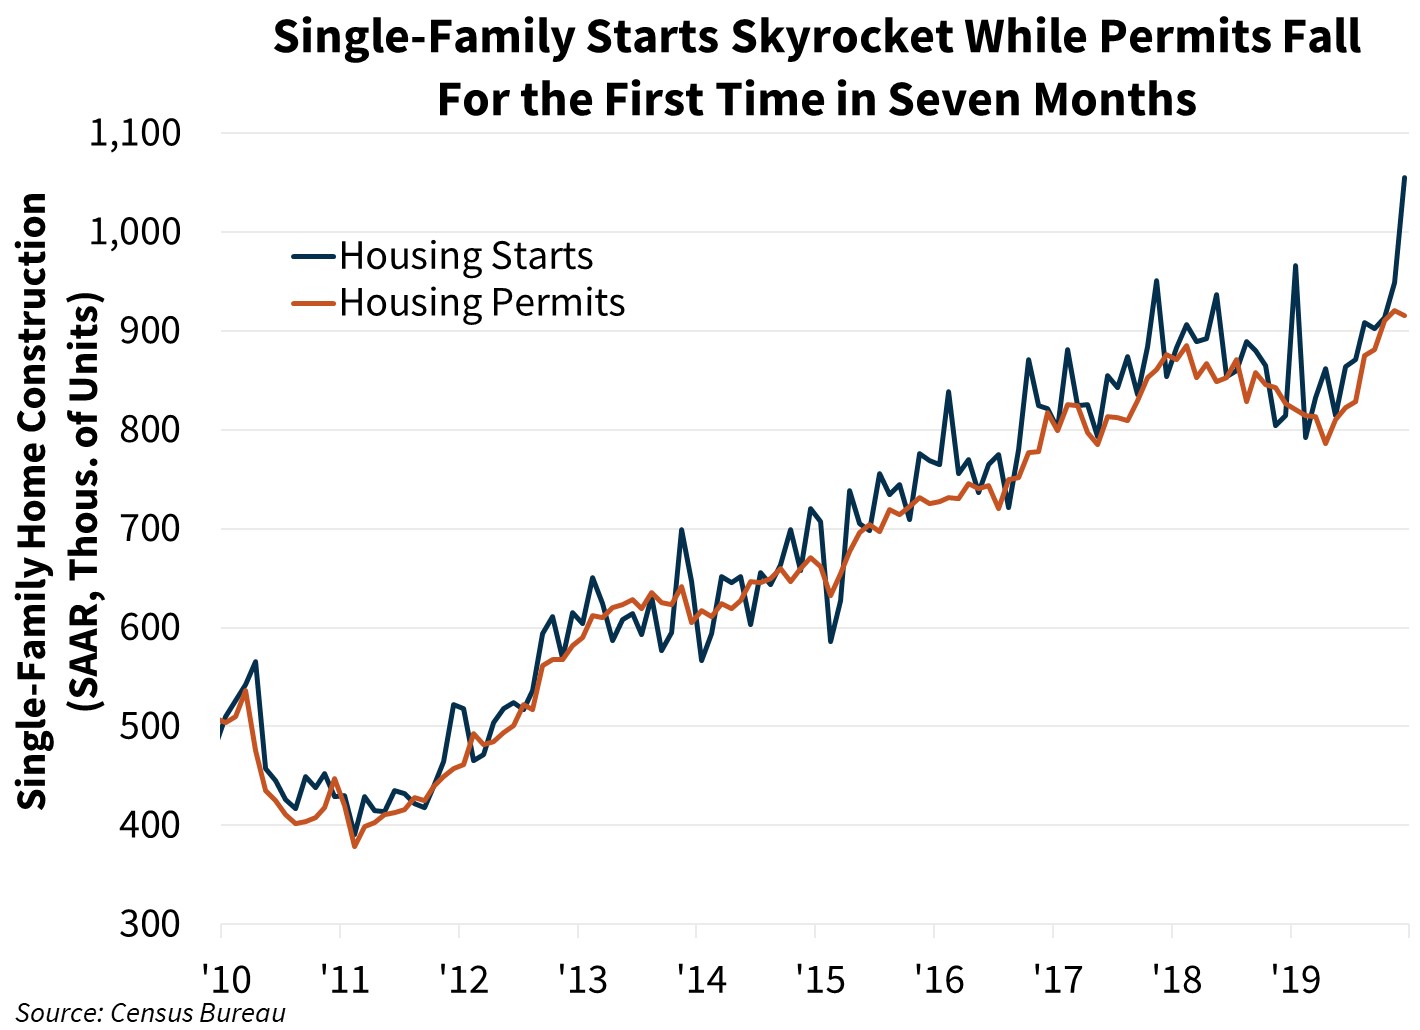 Single-Family Starts Skyrocket While Permits Fall For the First Time in Seven Months